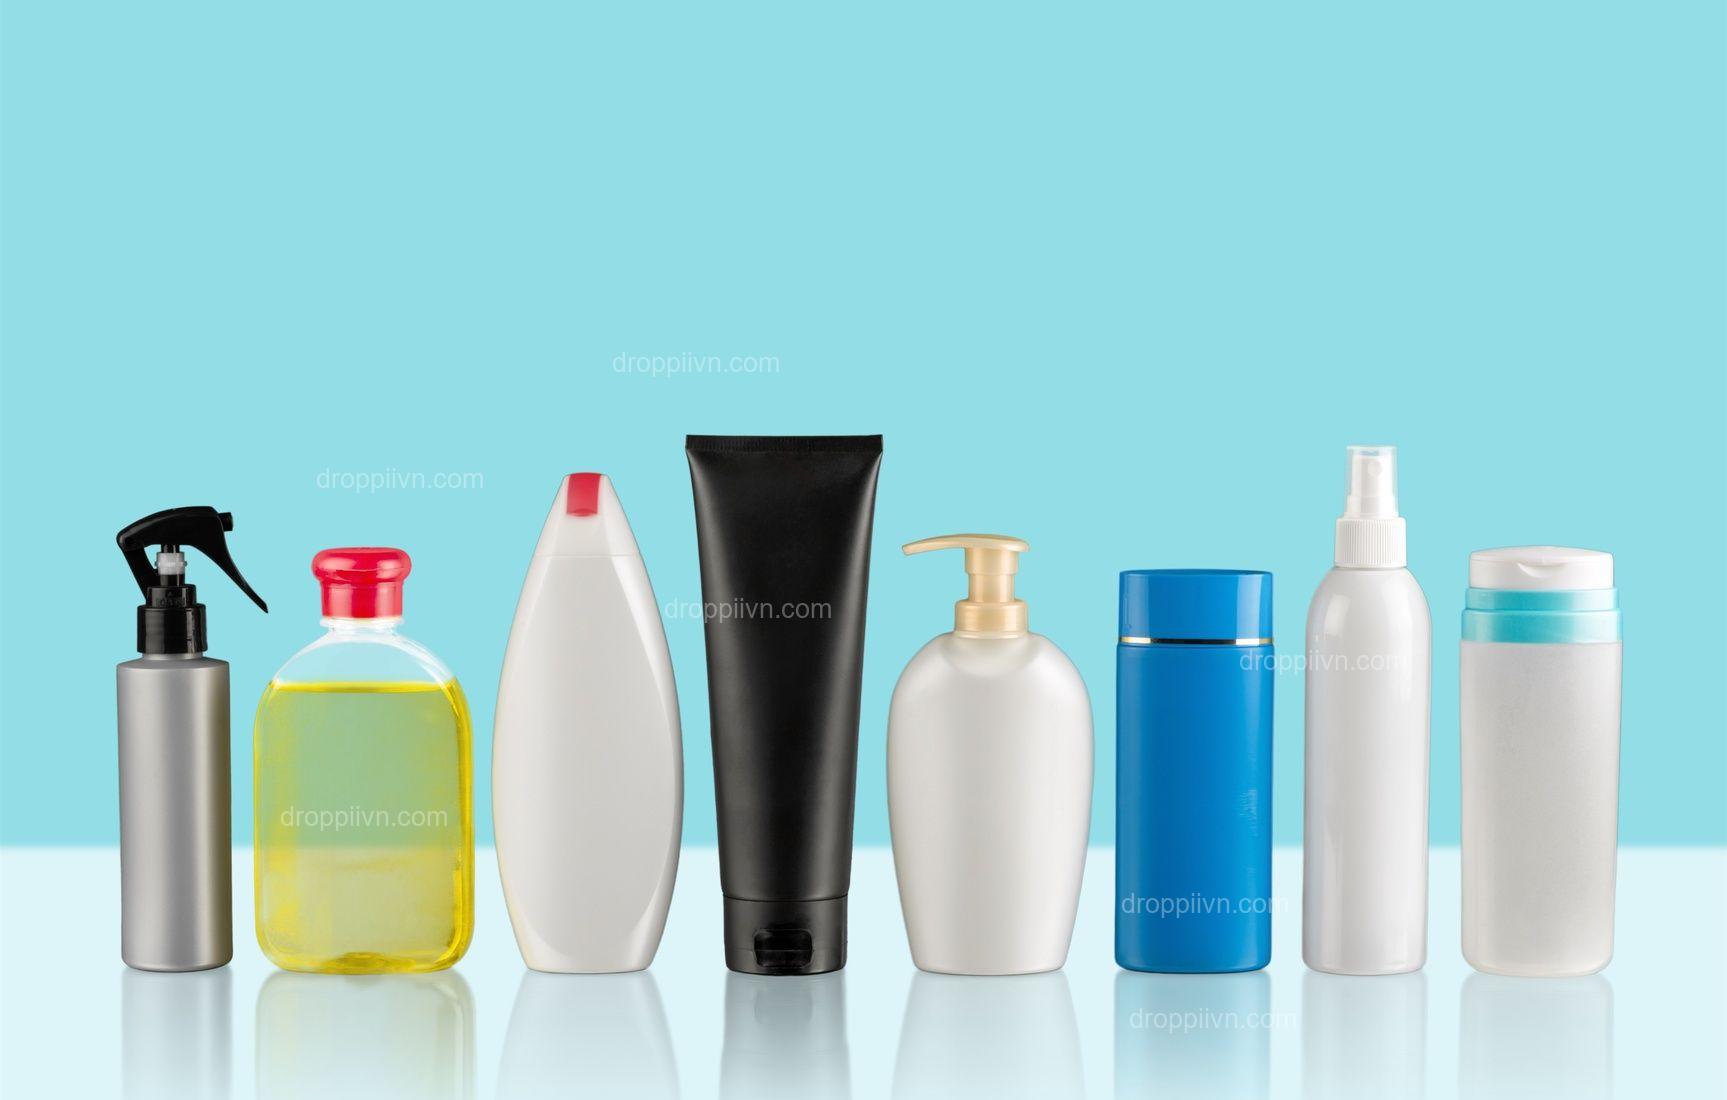 How to choose the right hair care products